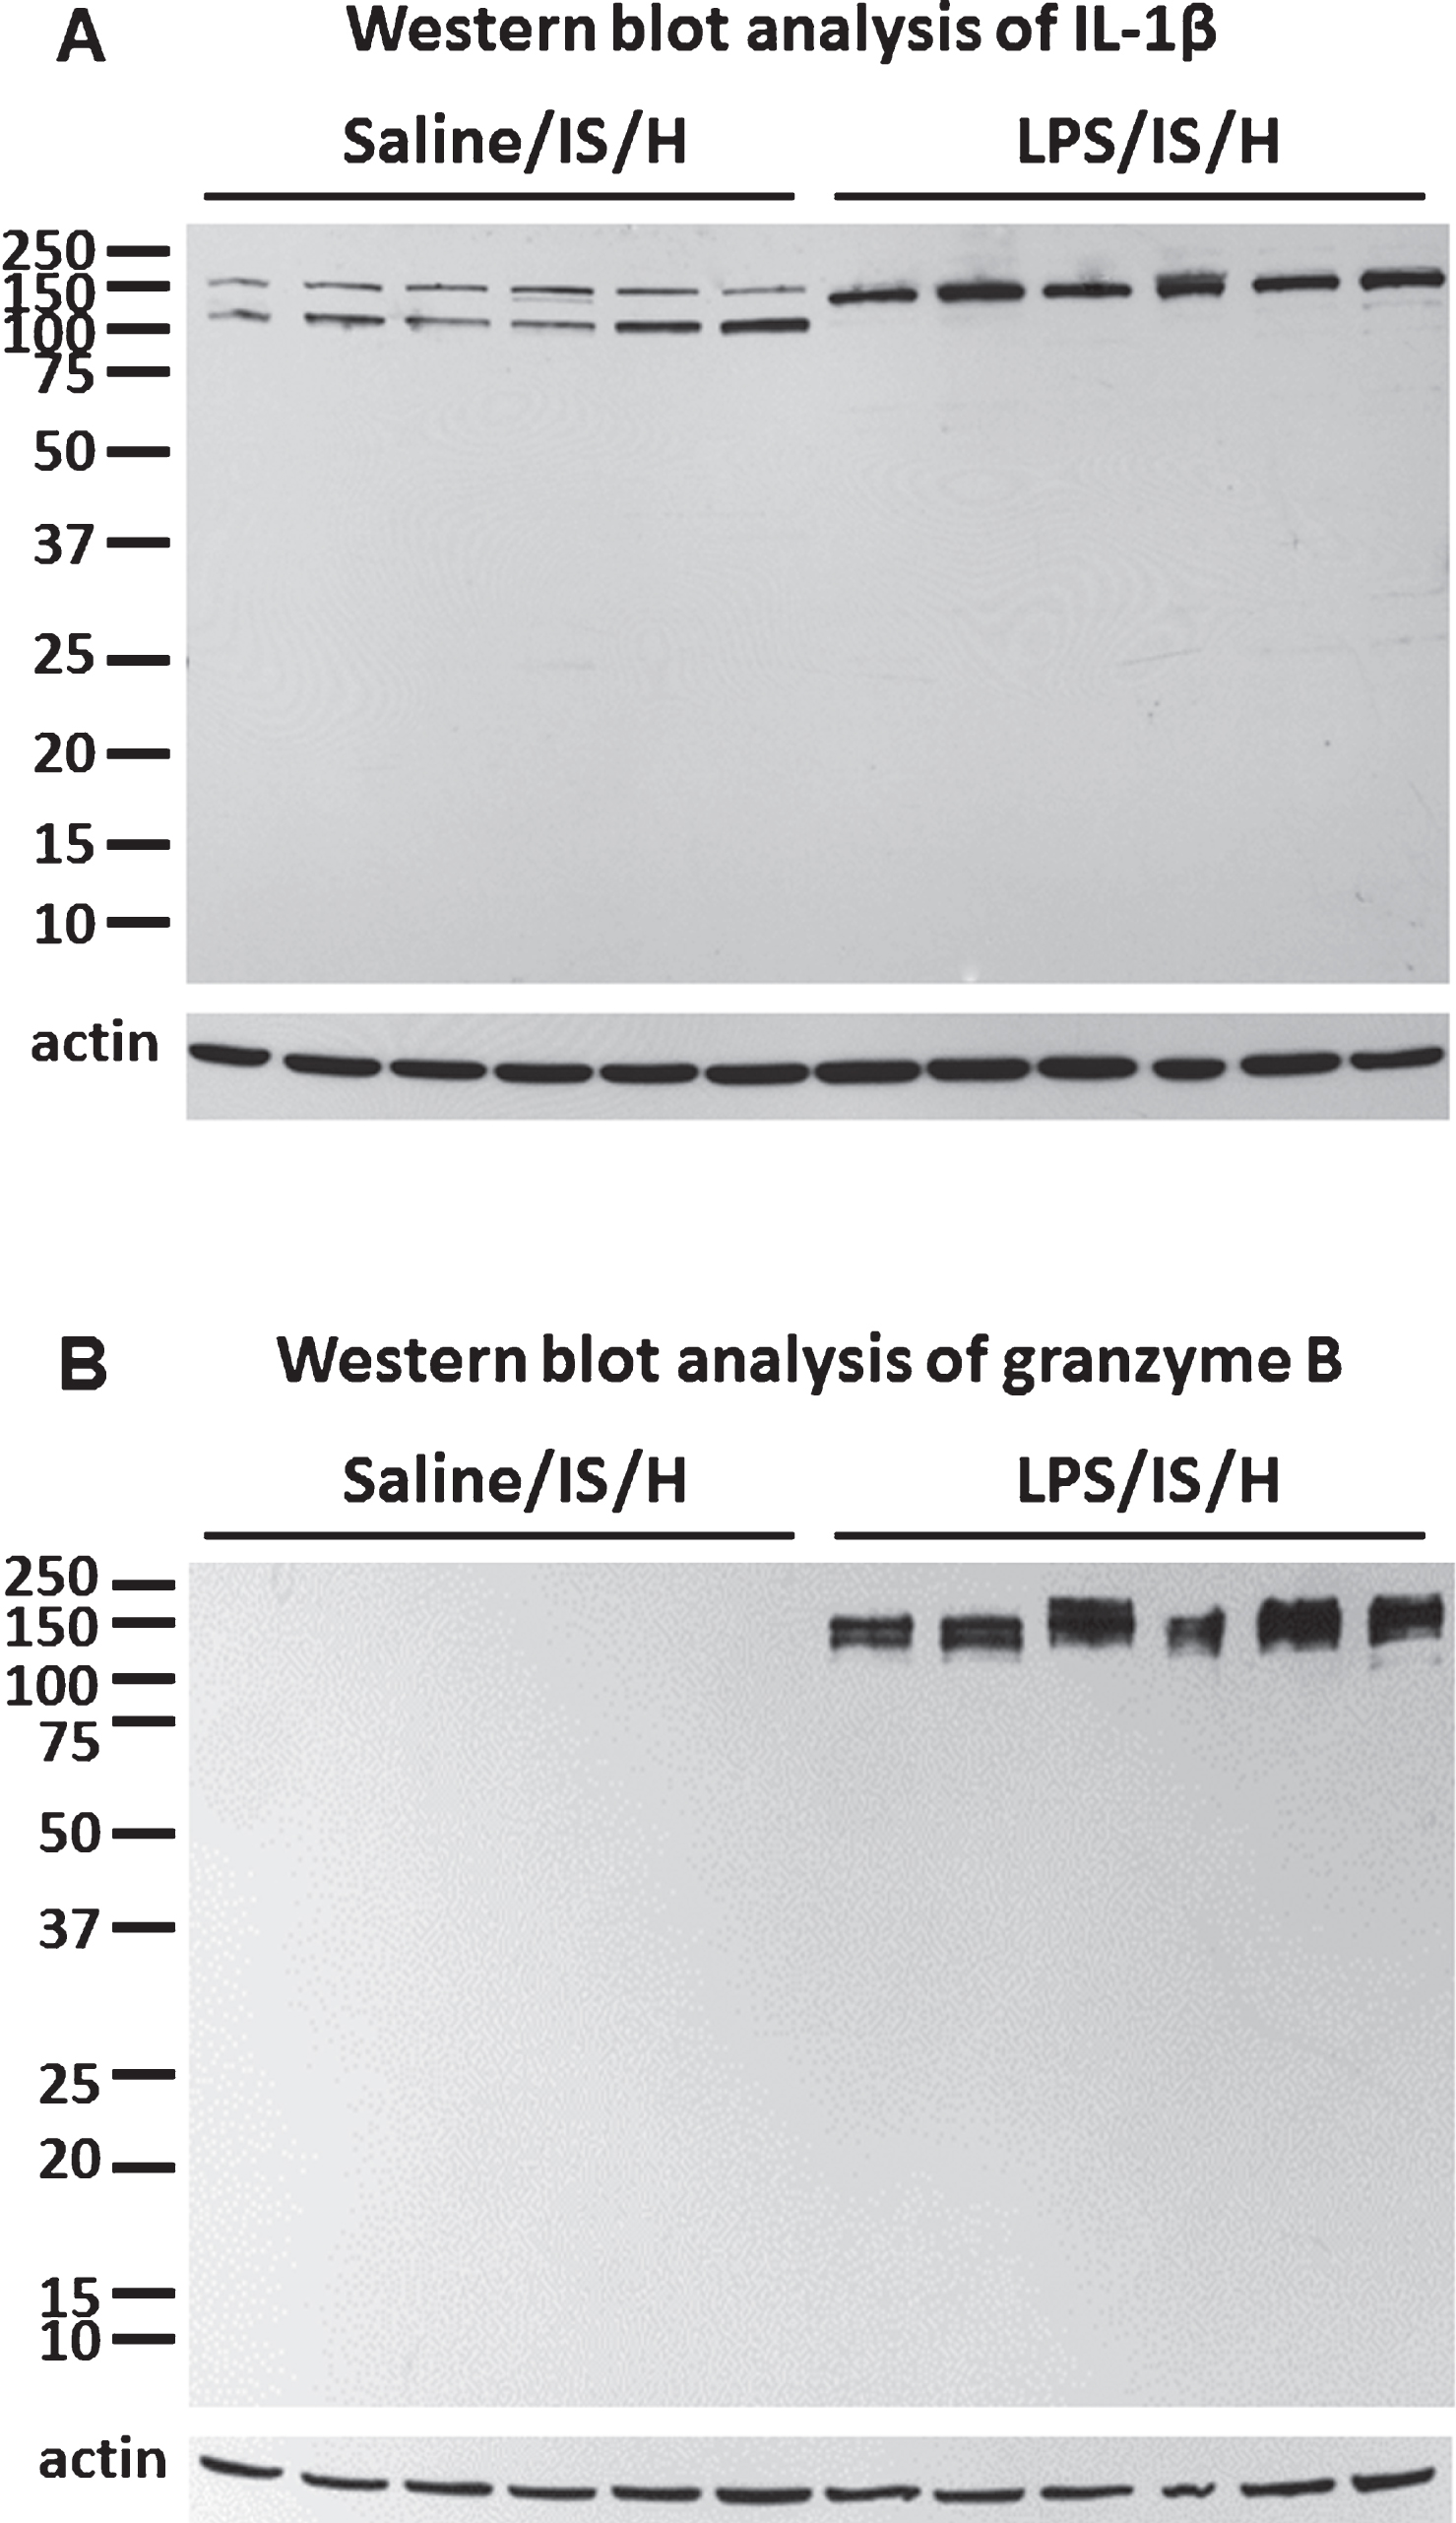 Western blot analysis for IL-1β and granzyme B in the cortex ipsilateral to ischemia at 12 weeks following LPS/IS/H and saline/IS/H. A) Interleukin-1β (IL-1β) was induced after saline/IS/H and LPS/IS/H. Note that two bands of proteins (around 150 kDa and 120 kDa) were detected following saline/IS/H and only one protein band (around 140 kDa) was detected following LPS/IS/H. B) Granzyme B was not detectable following saline/IS/H but was markedly induced after LPS/IS/H. β-actin was used as the loading control.